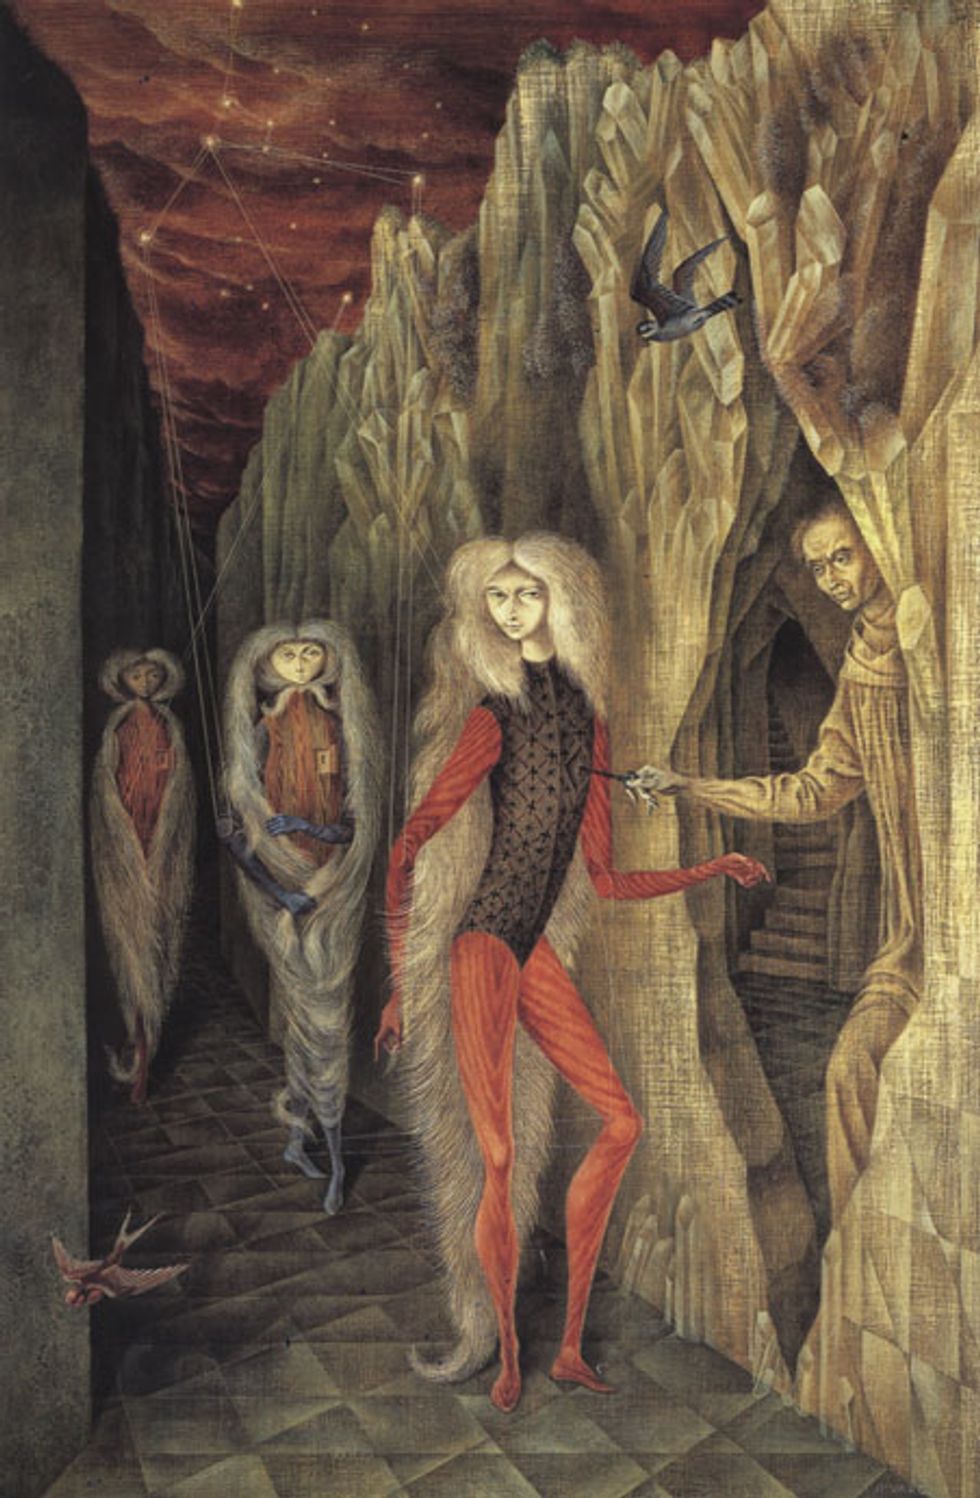 This Week's Hottest Events: Rice Paper Scissors, Remedios Varo, and Mythbusters